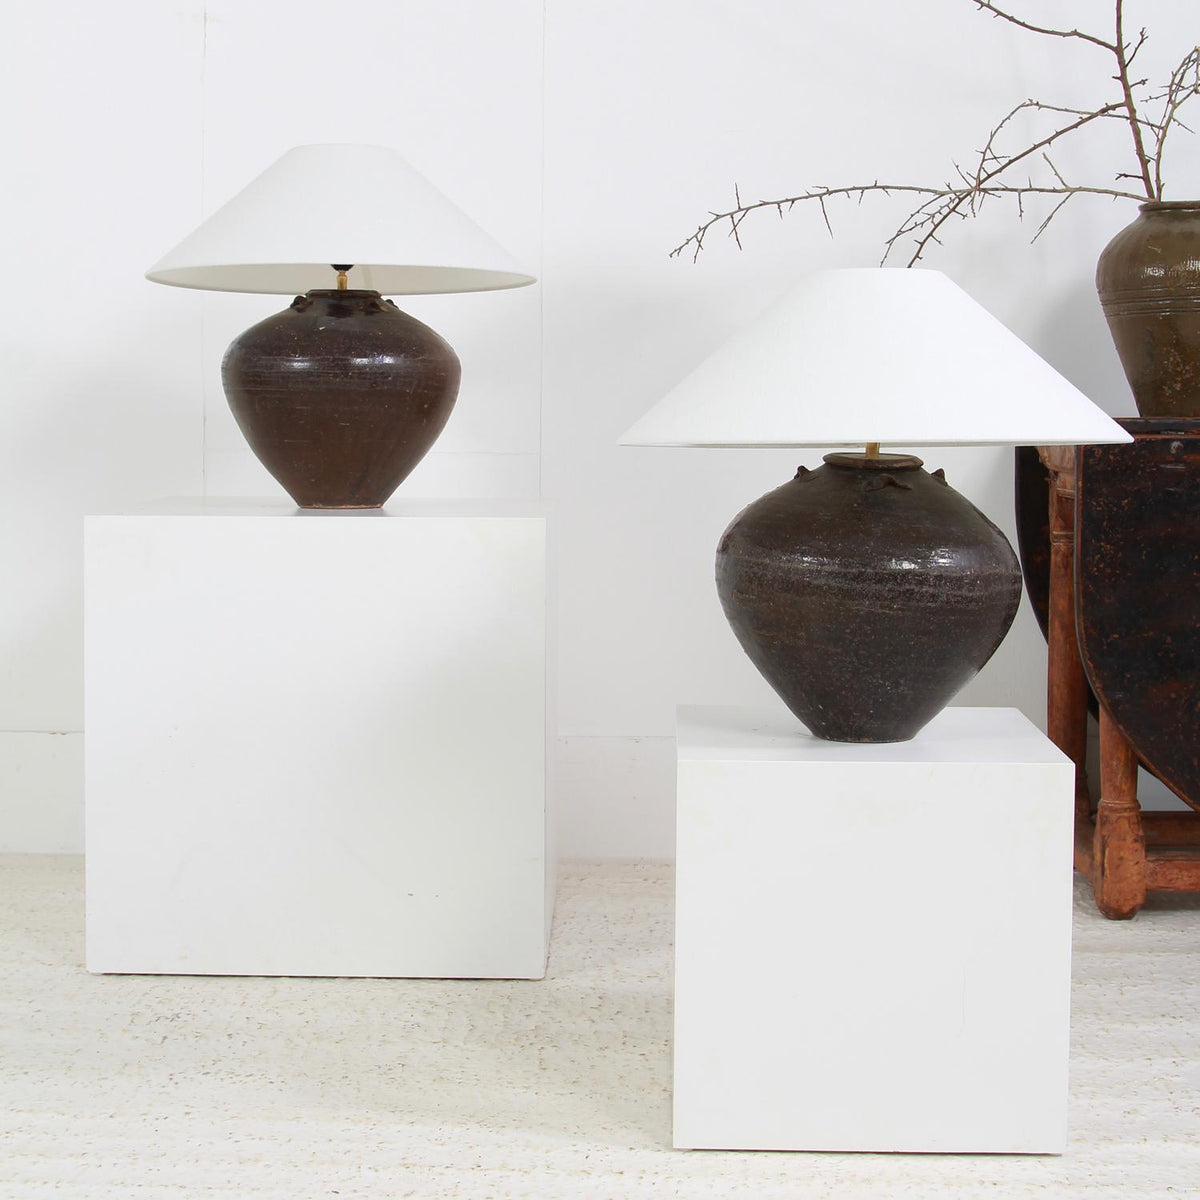 ANTIQUE CHINESE CERAMIC WINE POTS CONVERTED INTO LAMPS WITH WHITE LINEN SHADE